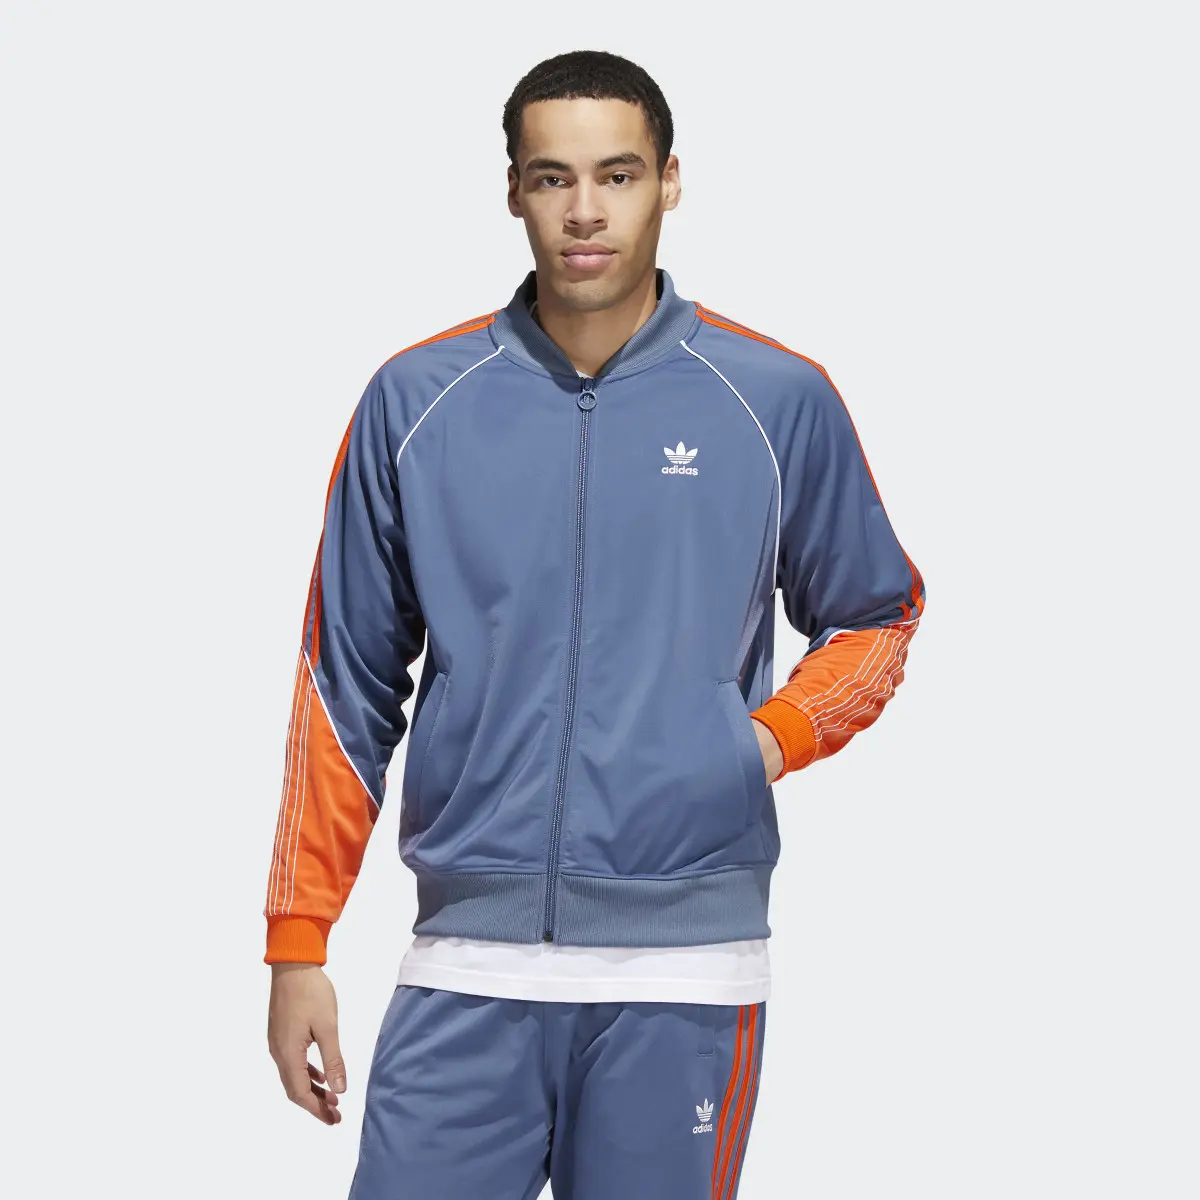 Adidas Tricot SST Track Top. 2